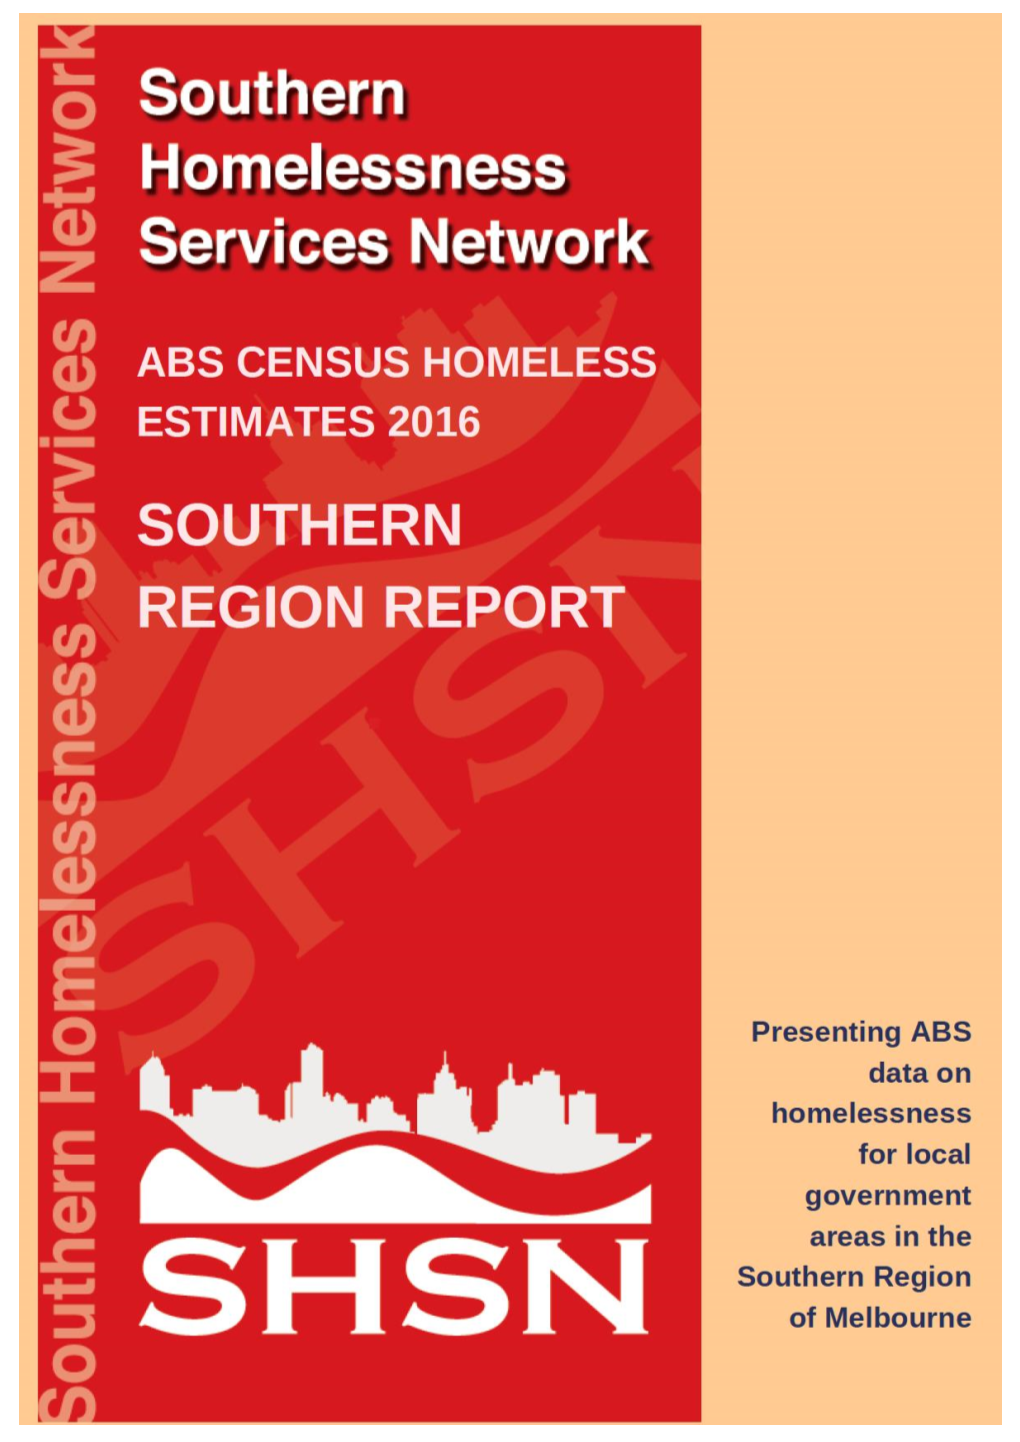 About the Southern Homelessness Services Network